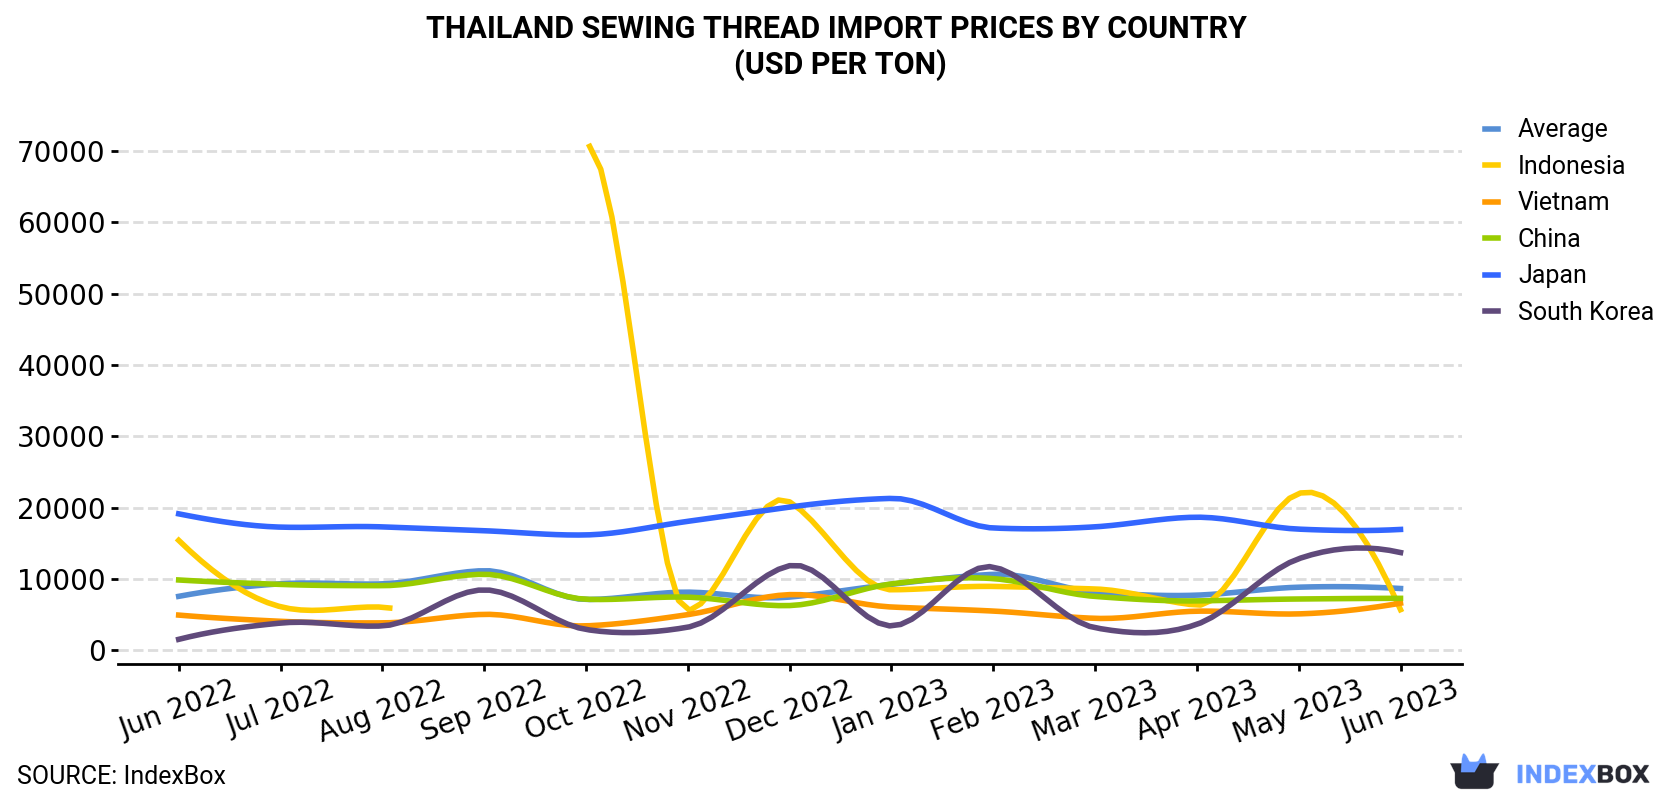 Thailand Sewing Thread Import Prices By Country (USD Per Ton)